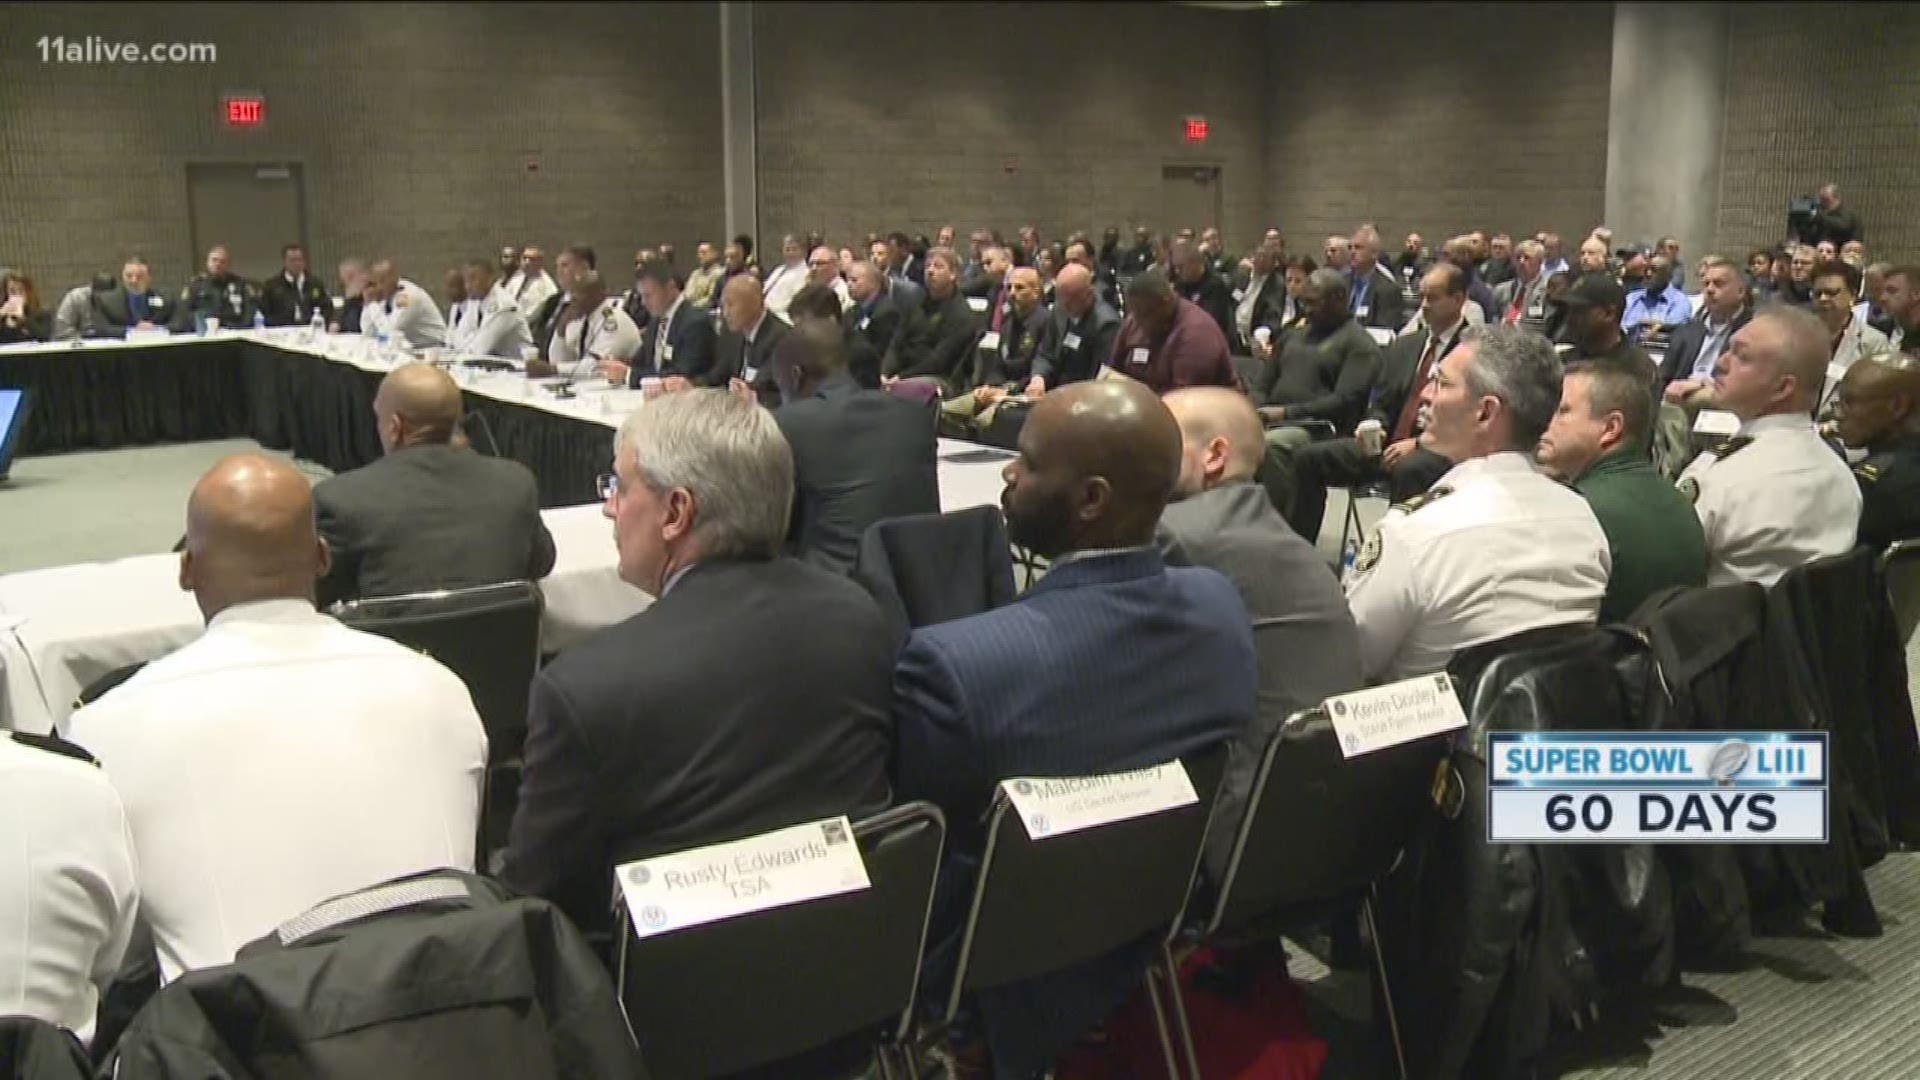 Atlanta Public Safety officials gathered at the Georgia World Congress Center to discuss security for Super Bowl 53.